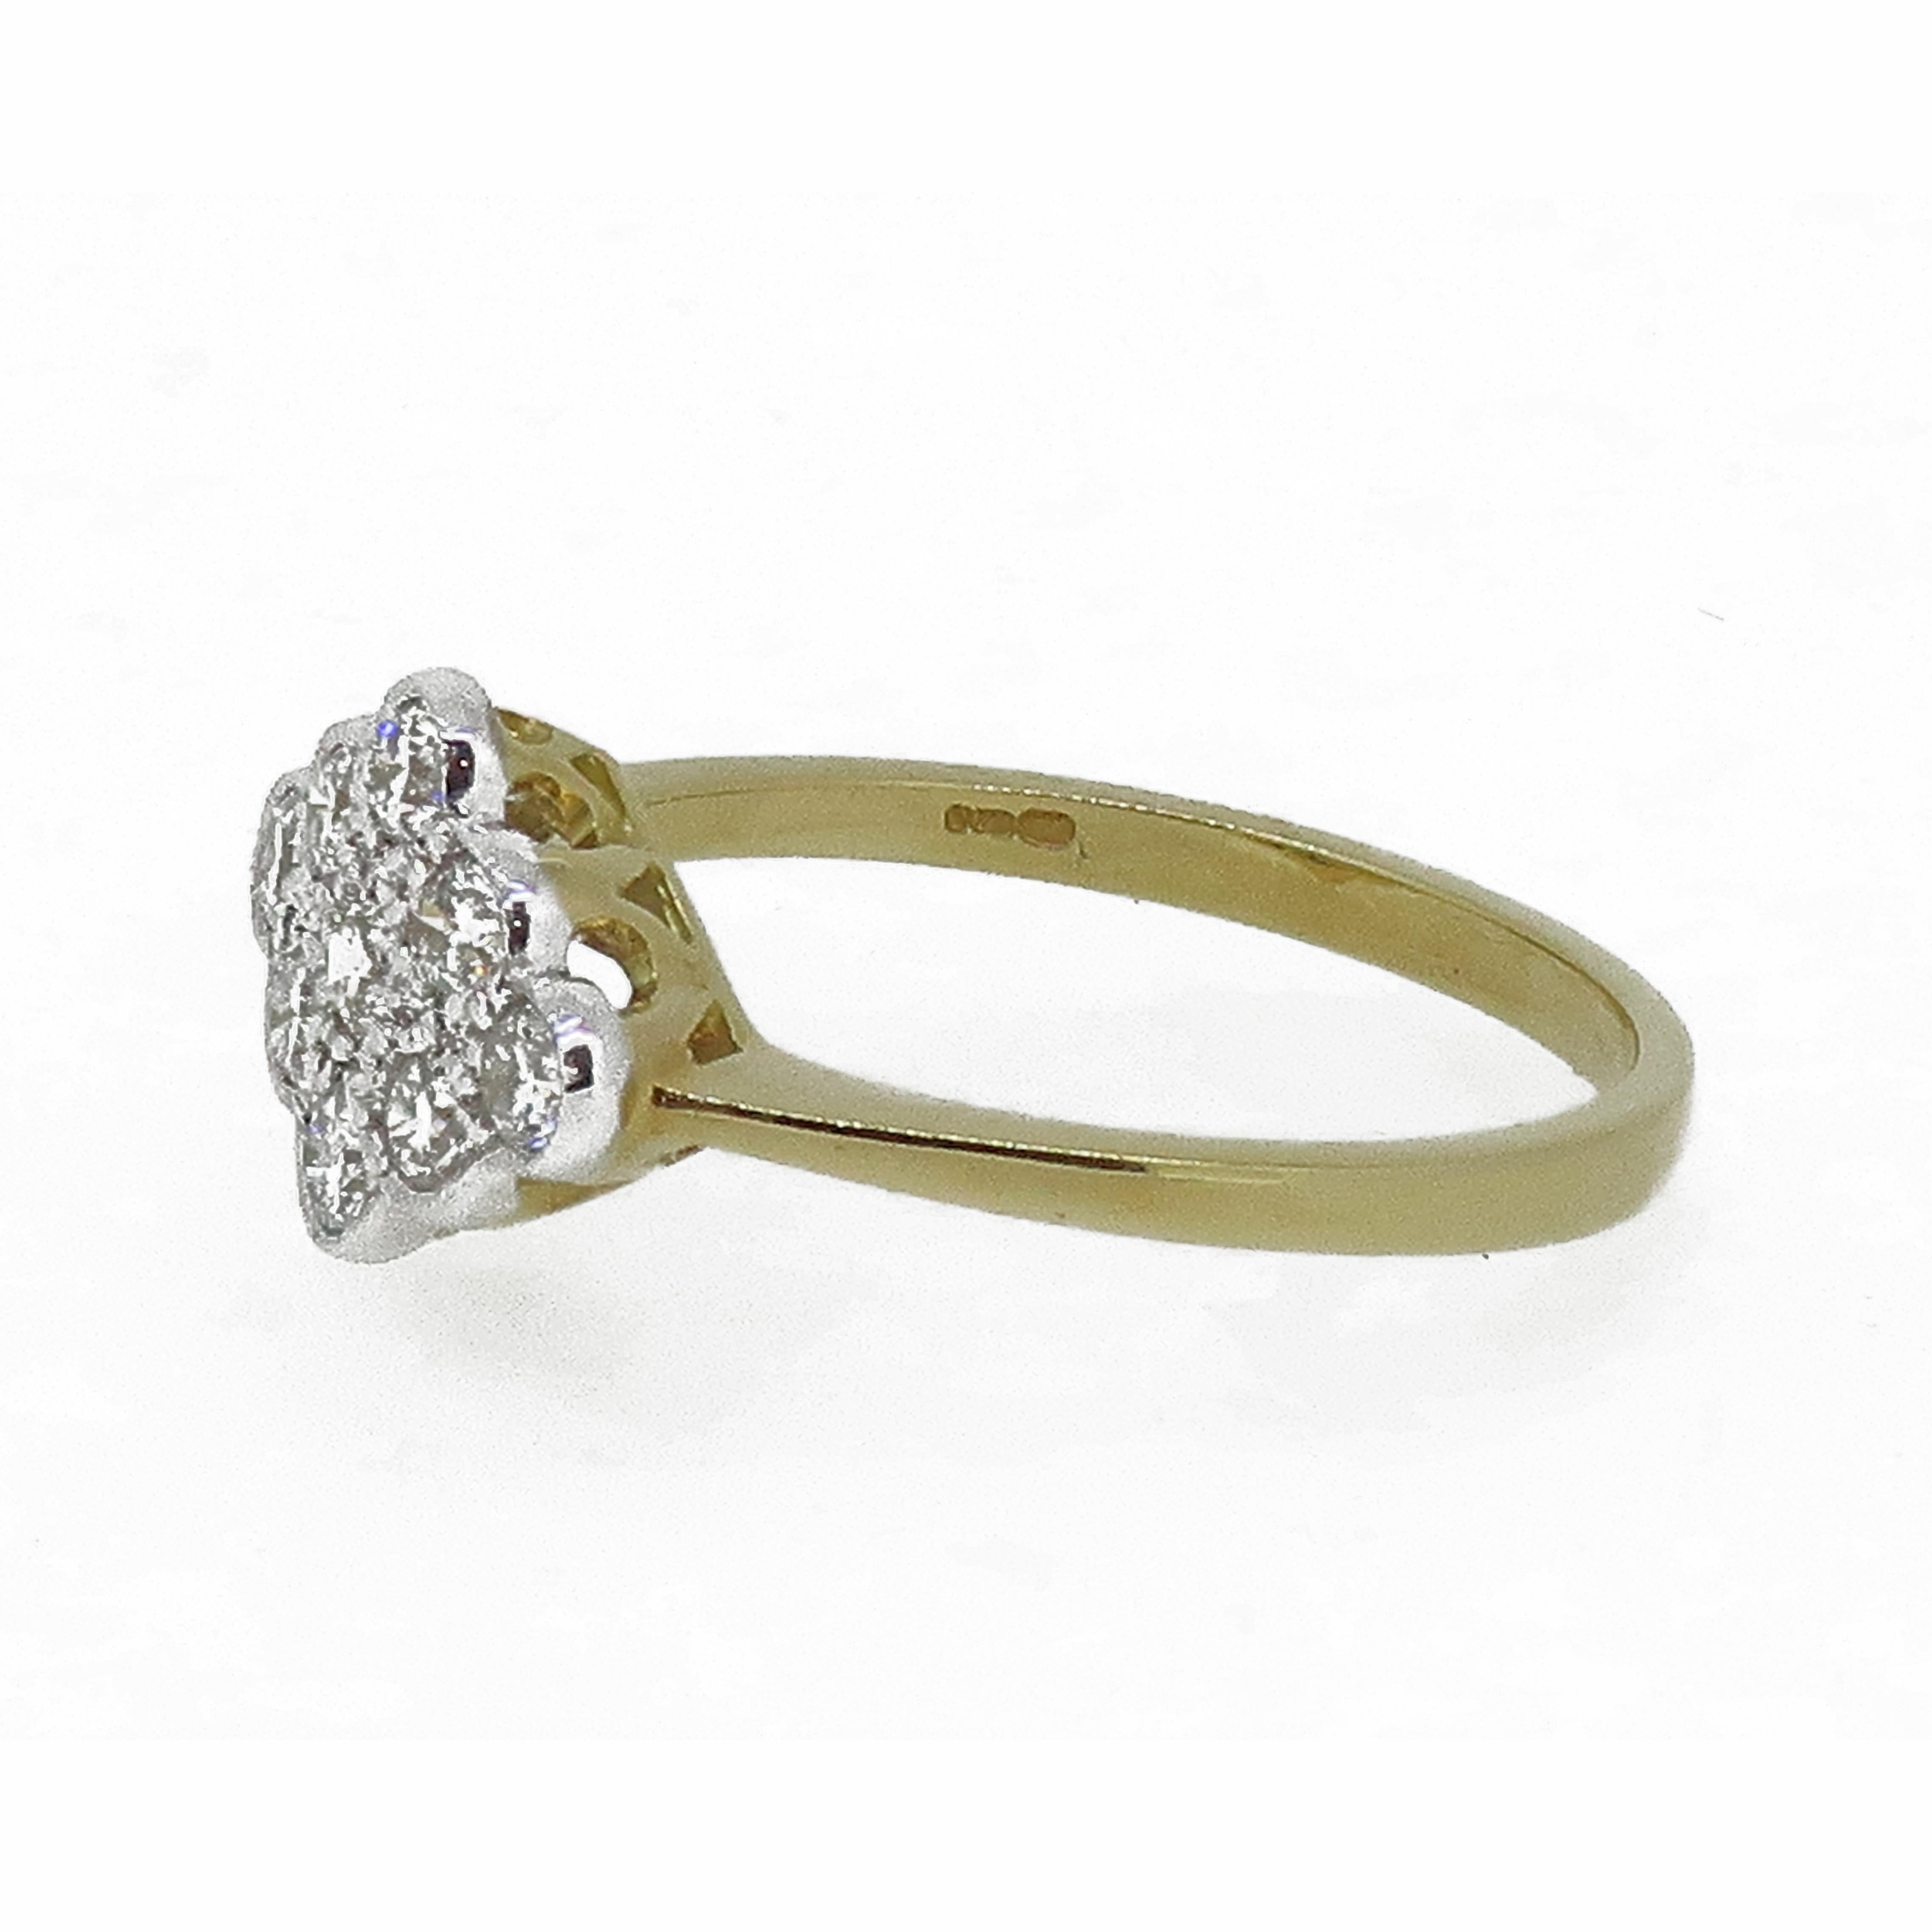 Diamond Edwardian Style Cluster Ring 18ct Yellow & White Gold 

A dazzling Edwardian style diamond cluster ring. Delicate and understated brilliant cut diamond cluster ring, consisting of nine white brilliant cut diamonds. All diamonds encased in